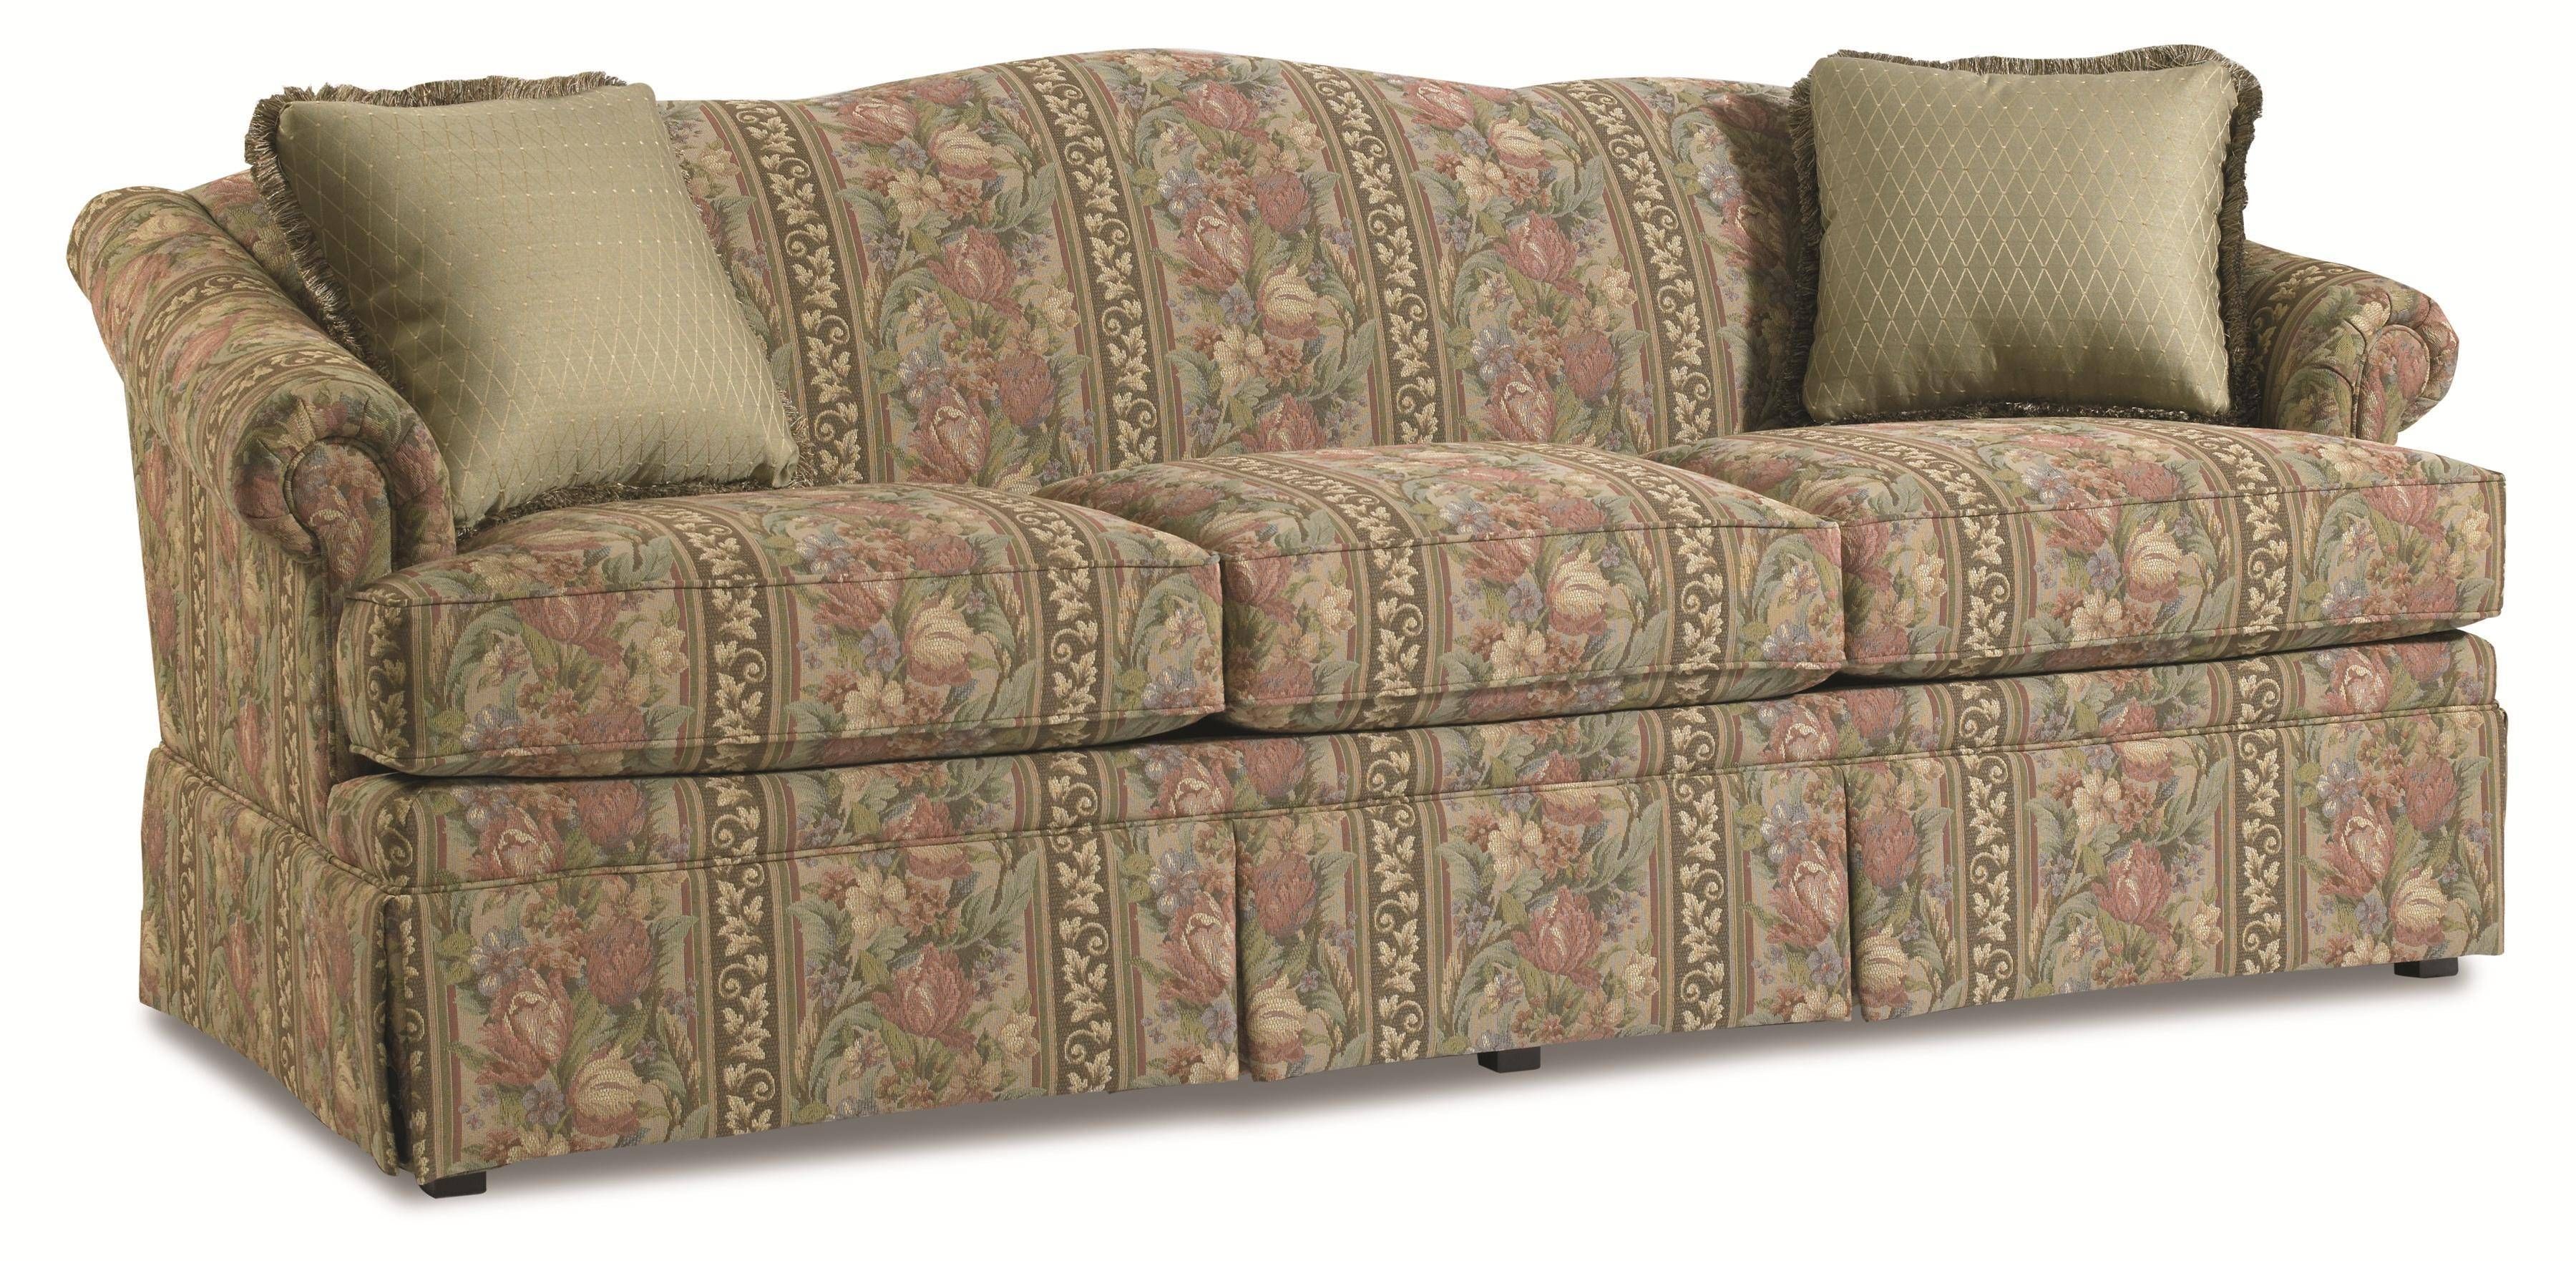 Great Clayton Marcus Sofa 12 For Sofas And Couches Set With Throughout Clayton Marcus Sofas (View 2 of 15)